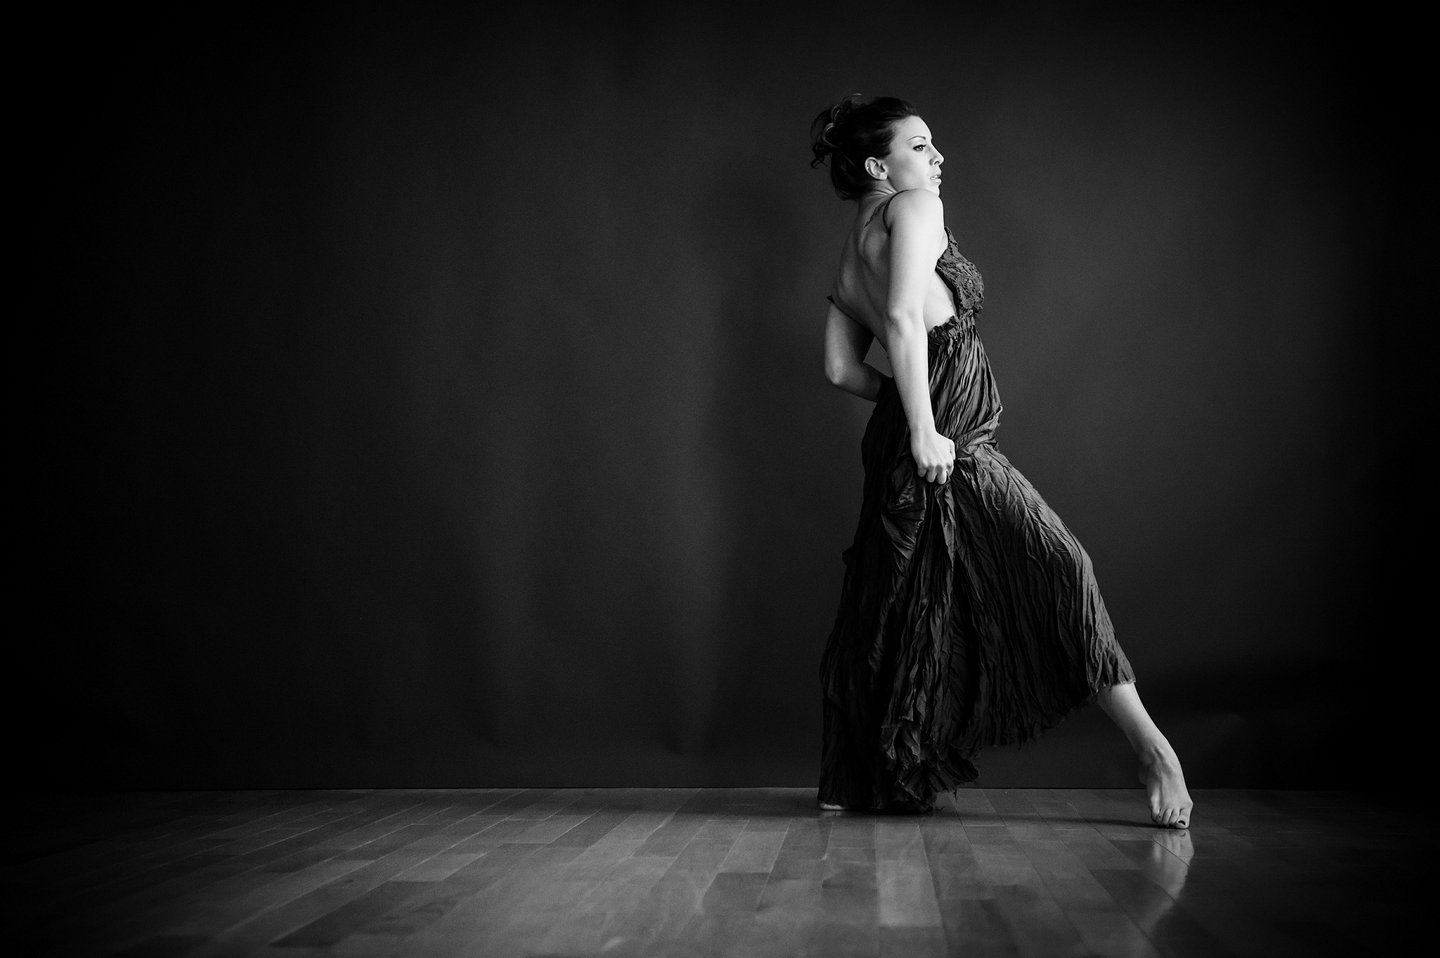 Los Angeles Dance Portrait Photo - Stephanie Abrams - by Tommy Xing Photography 10.jpg